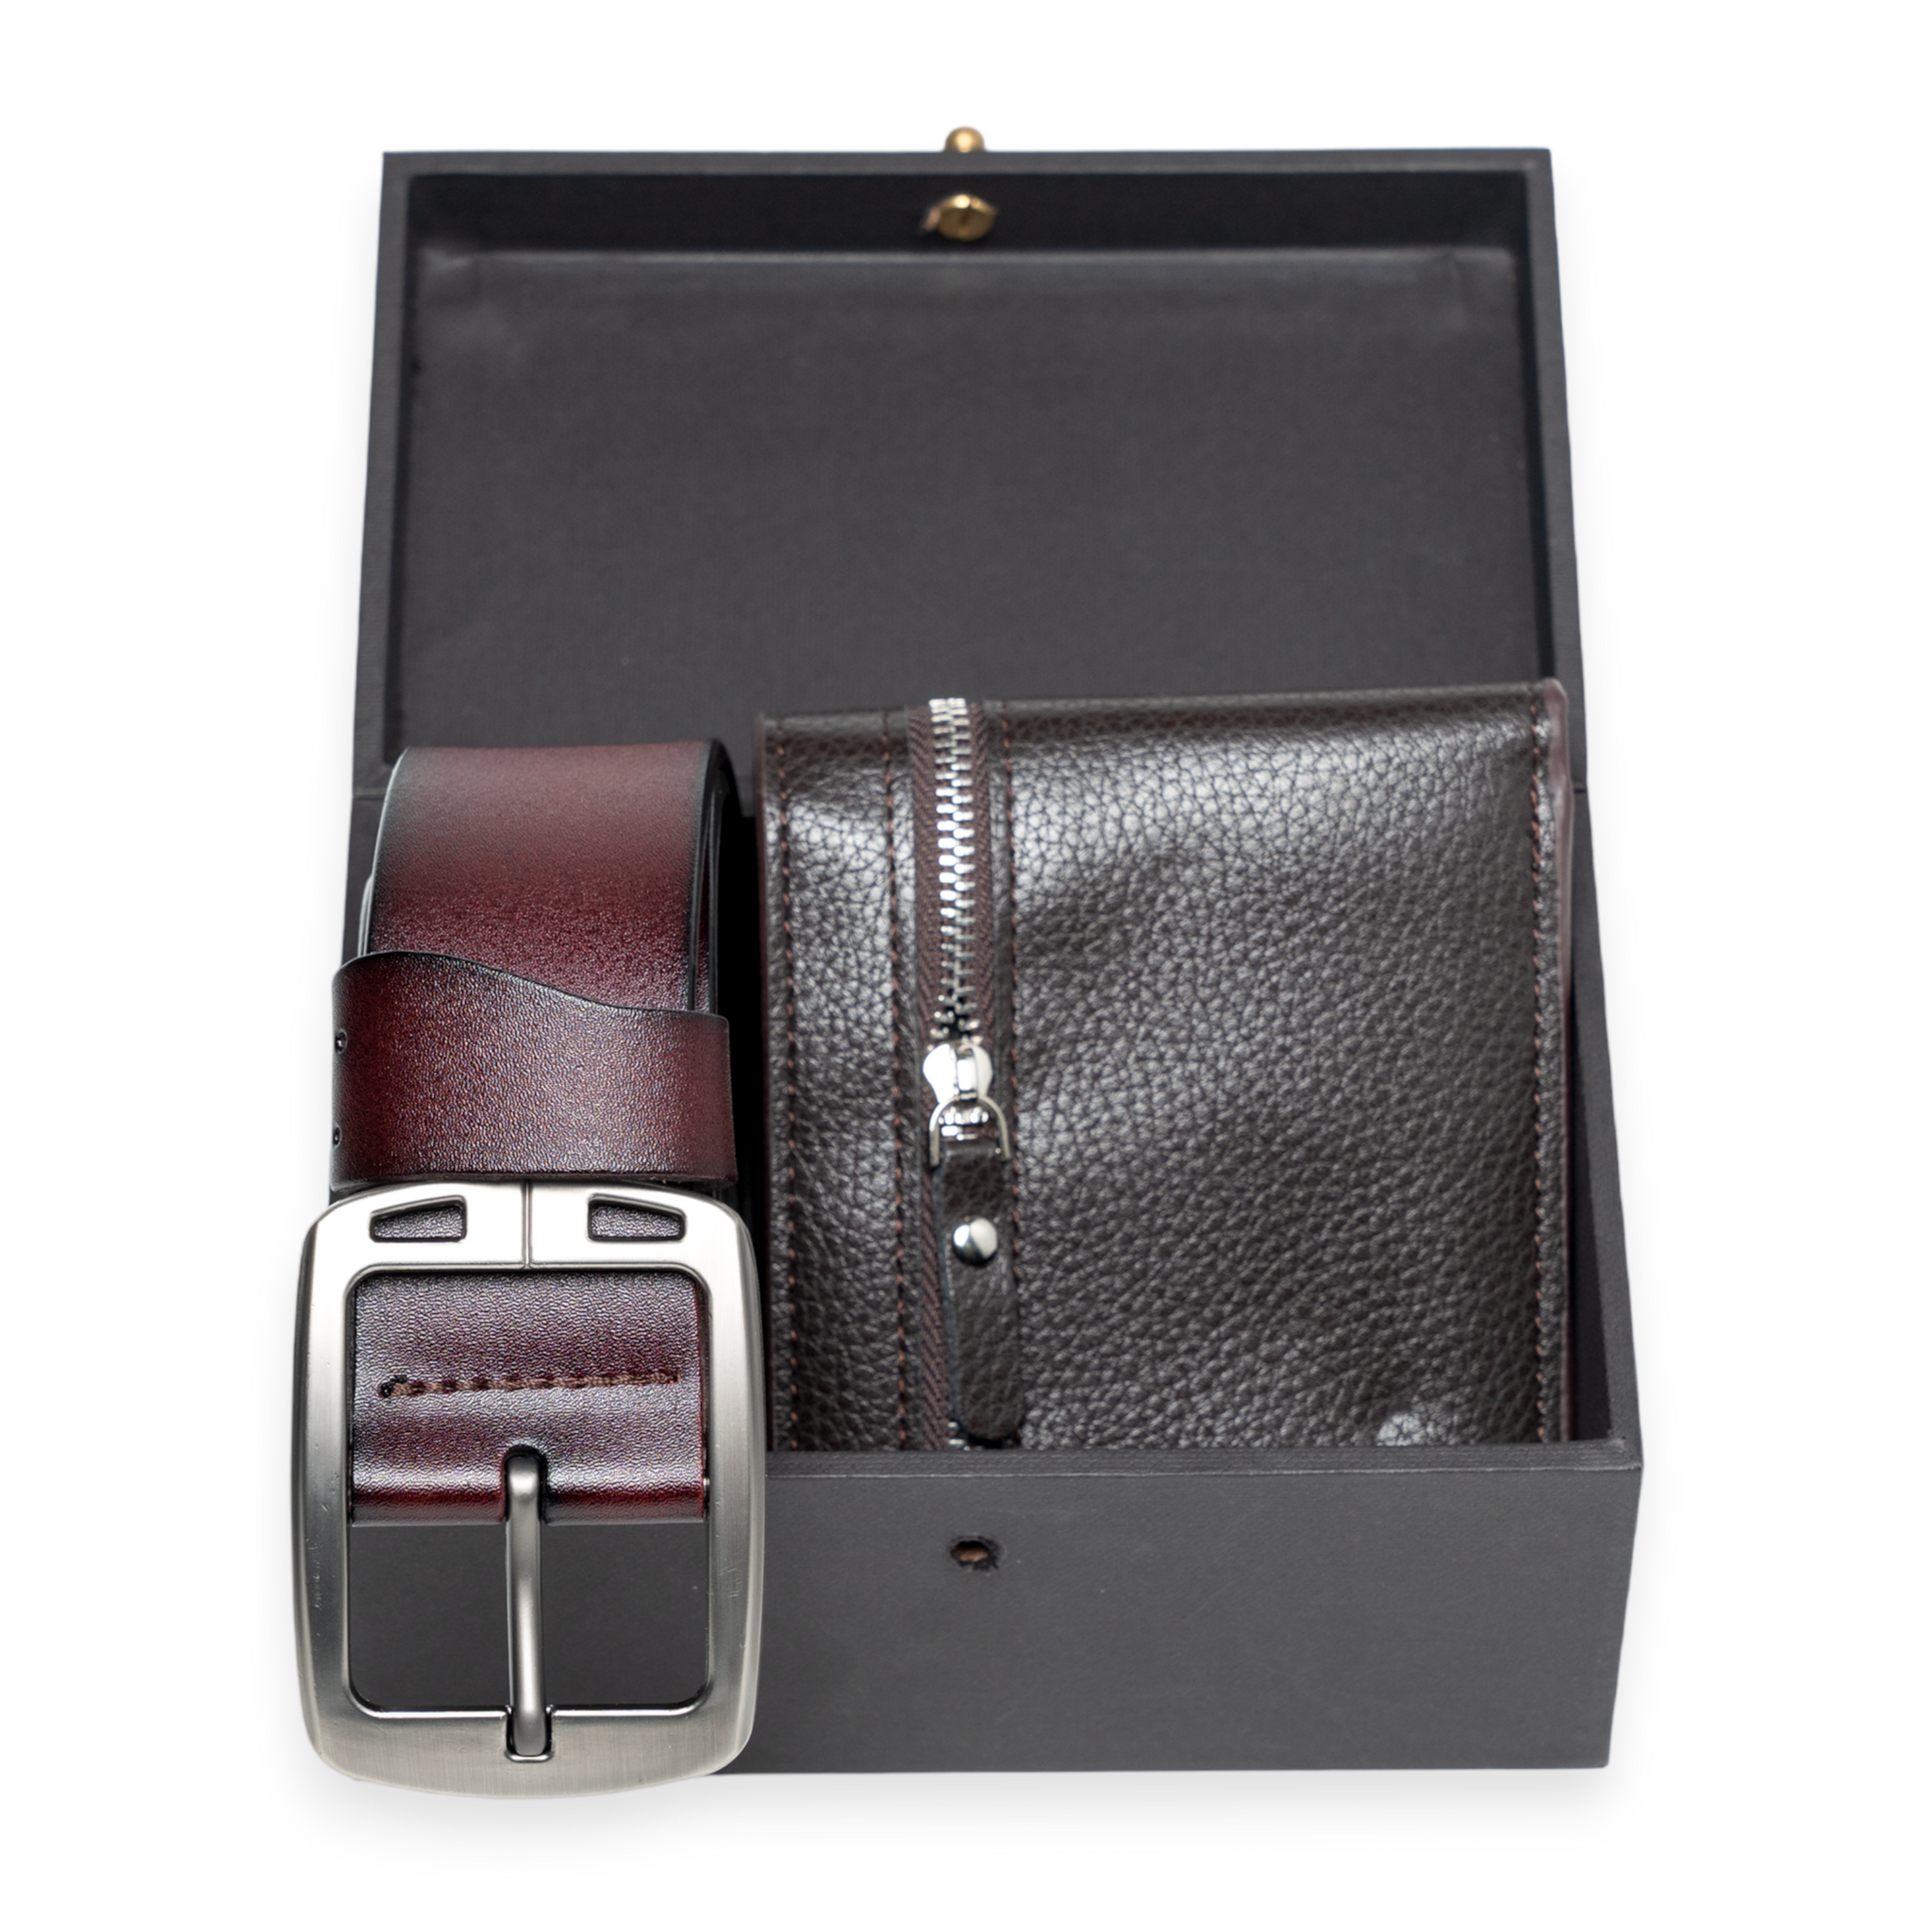 Chokore Special 2-in-1 Gift Set for Him (Maroon Belt & Wallet)